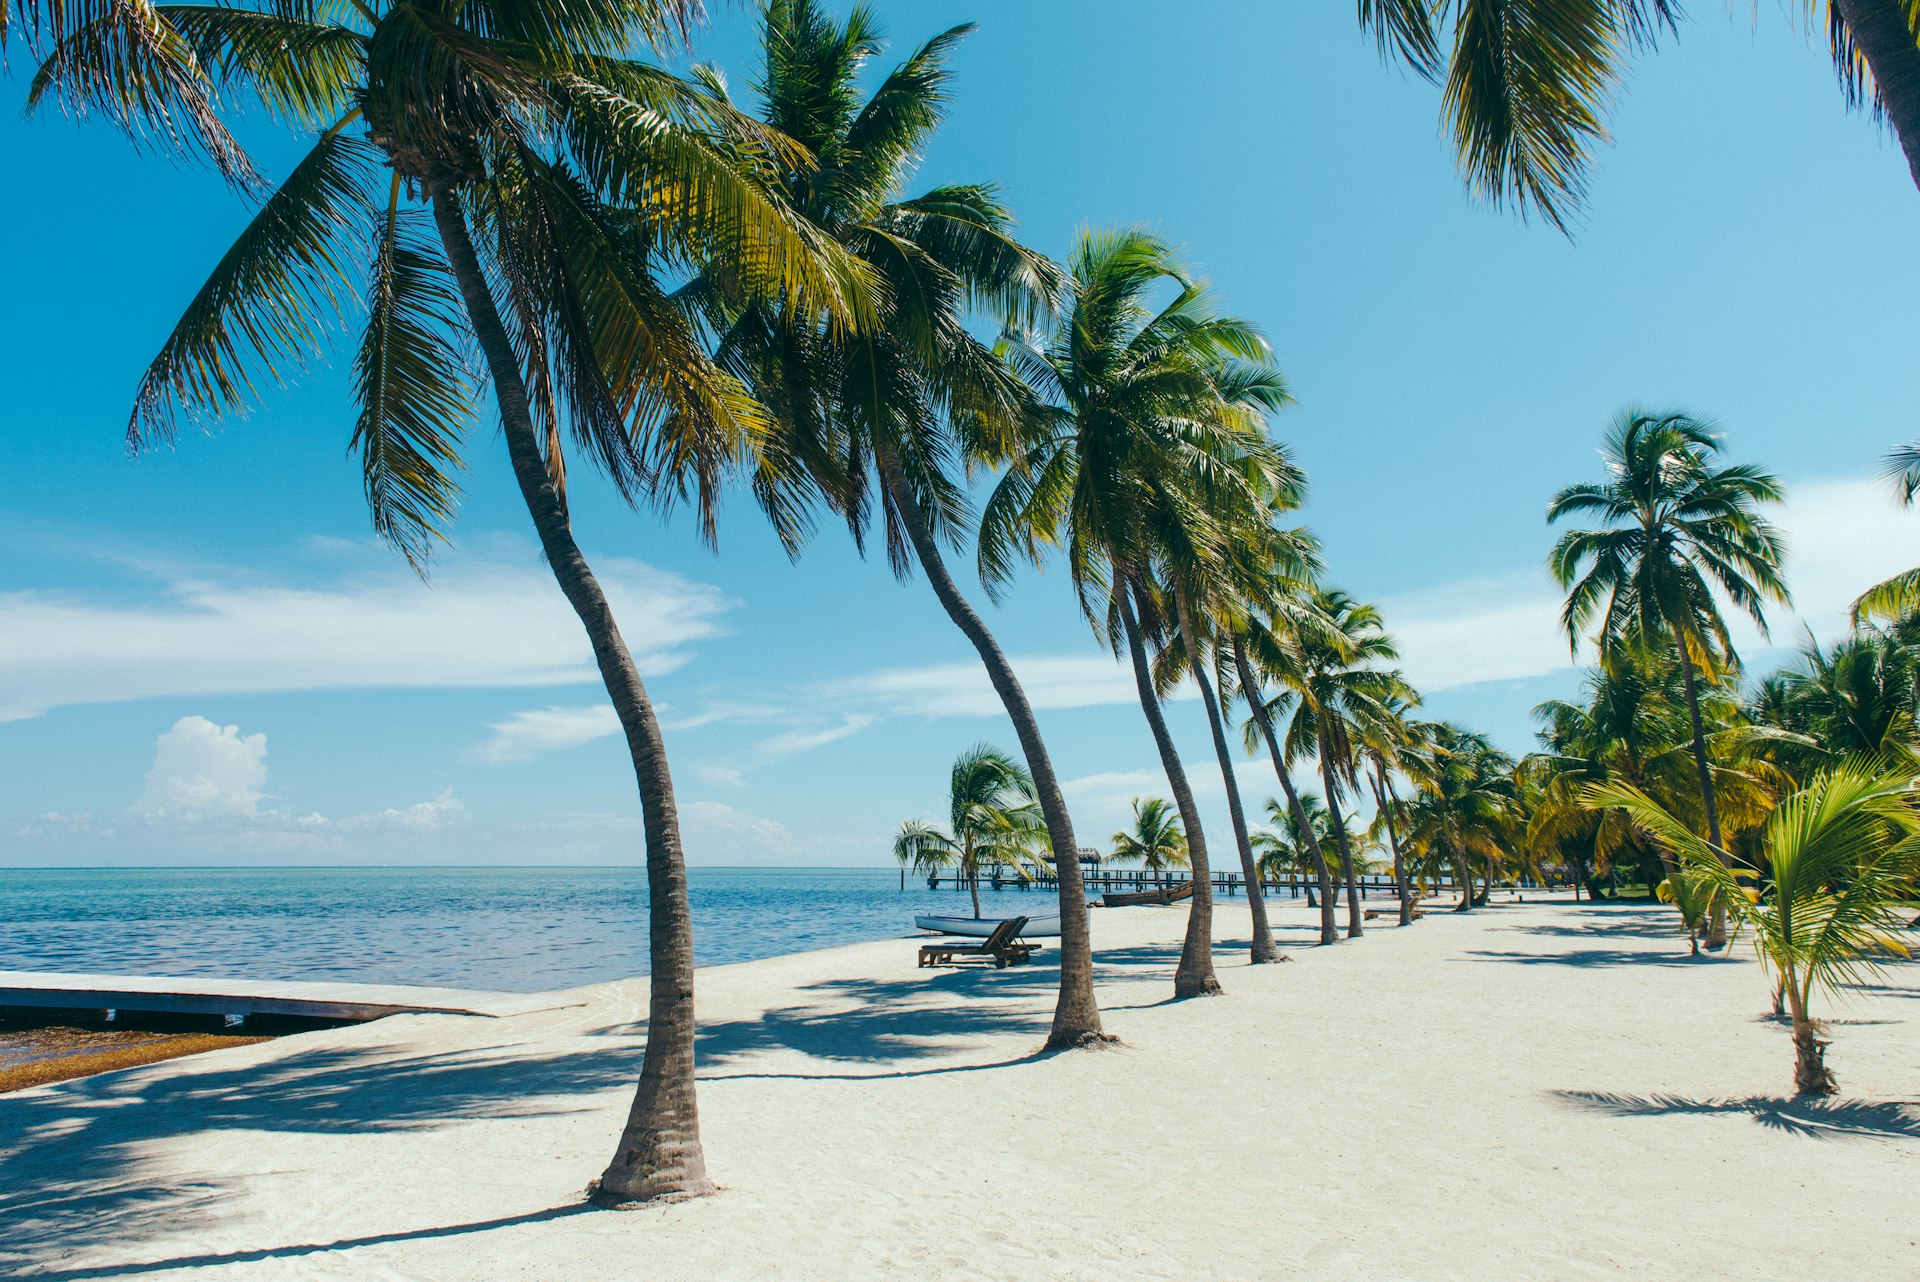 A row of palm trees on a fine, white-sand beach near turquoise water with small ripples -- a placid beach-side scene in Islamorada, Florida